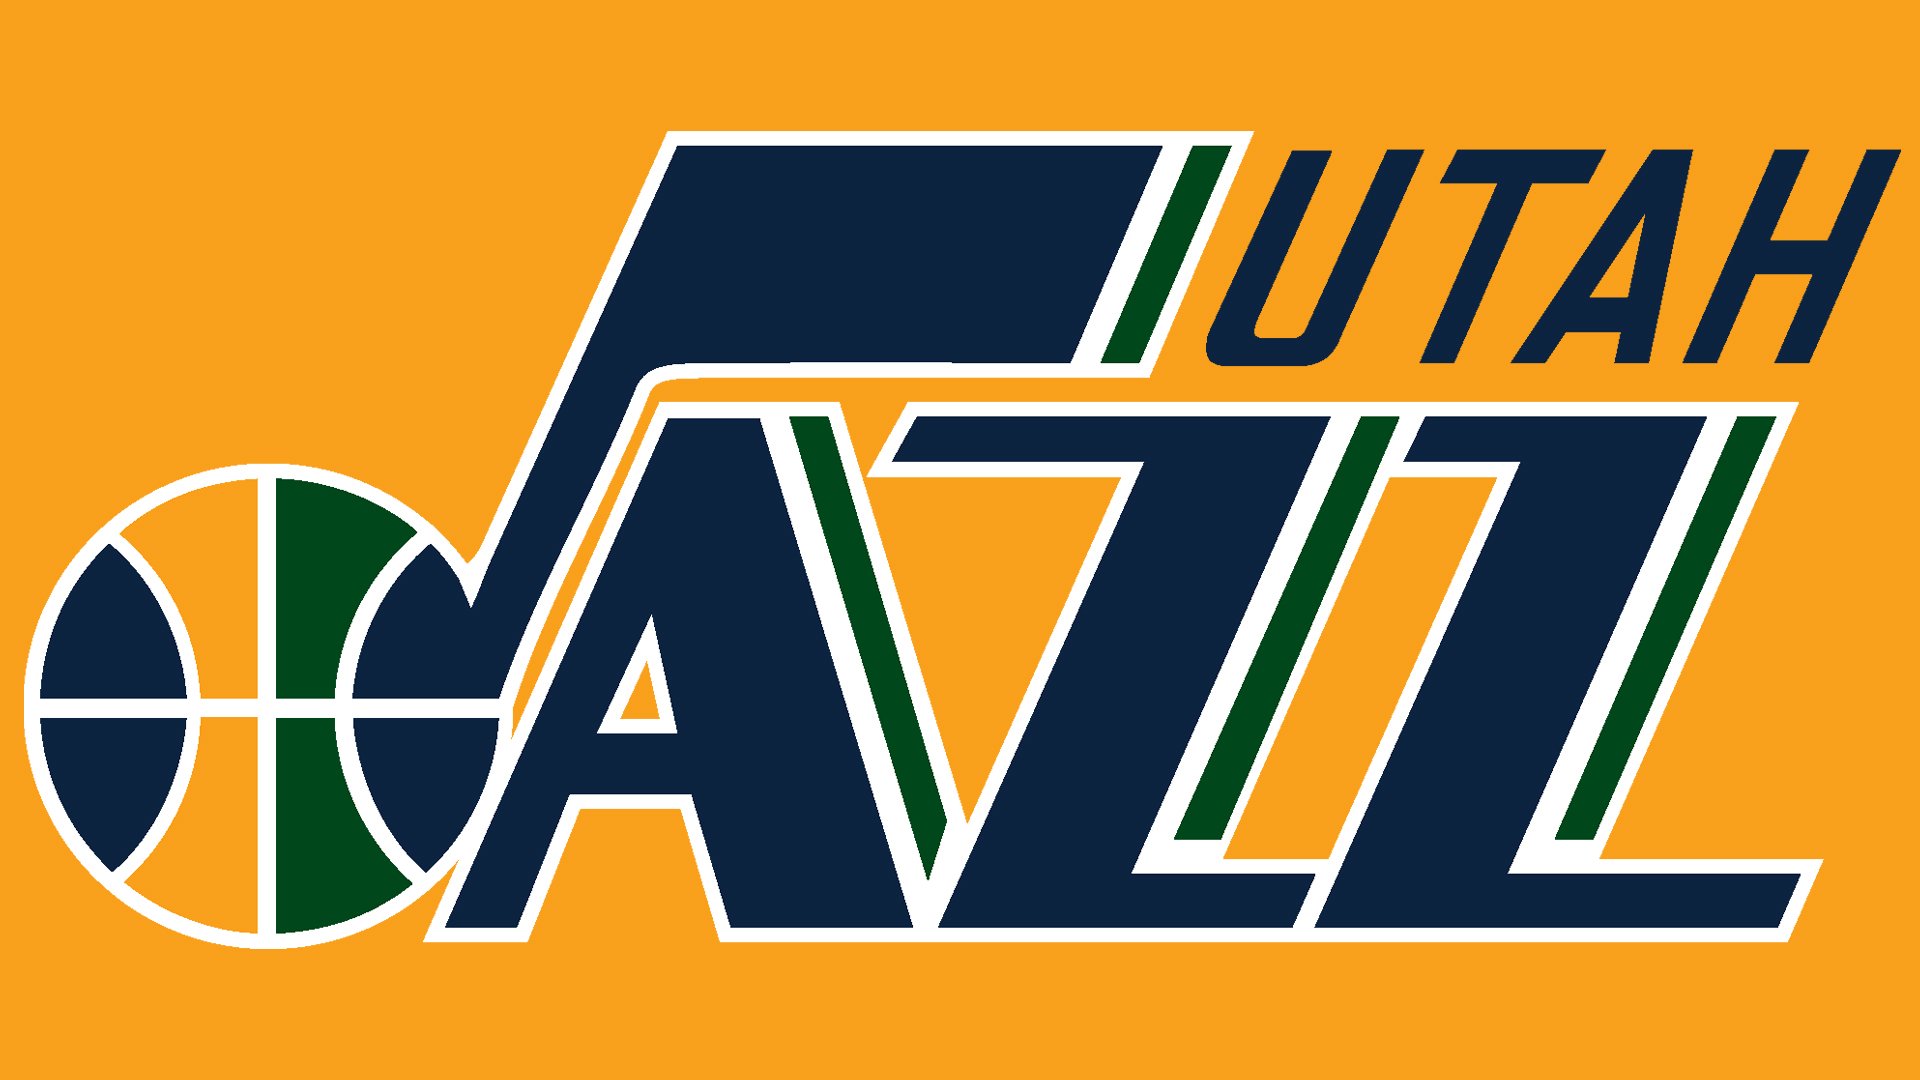 Meaning Utah Jazz logo and symbol | history and evolution1920 x 1080